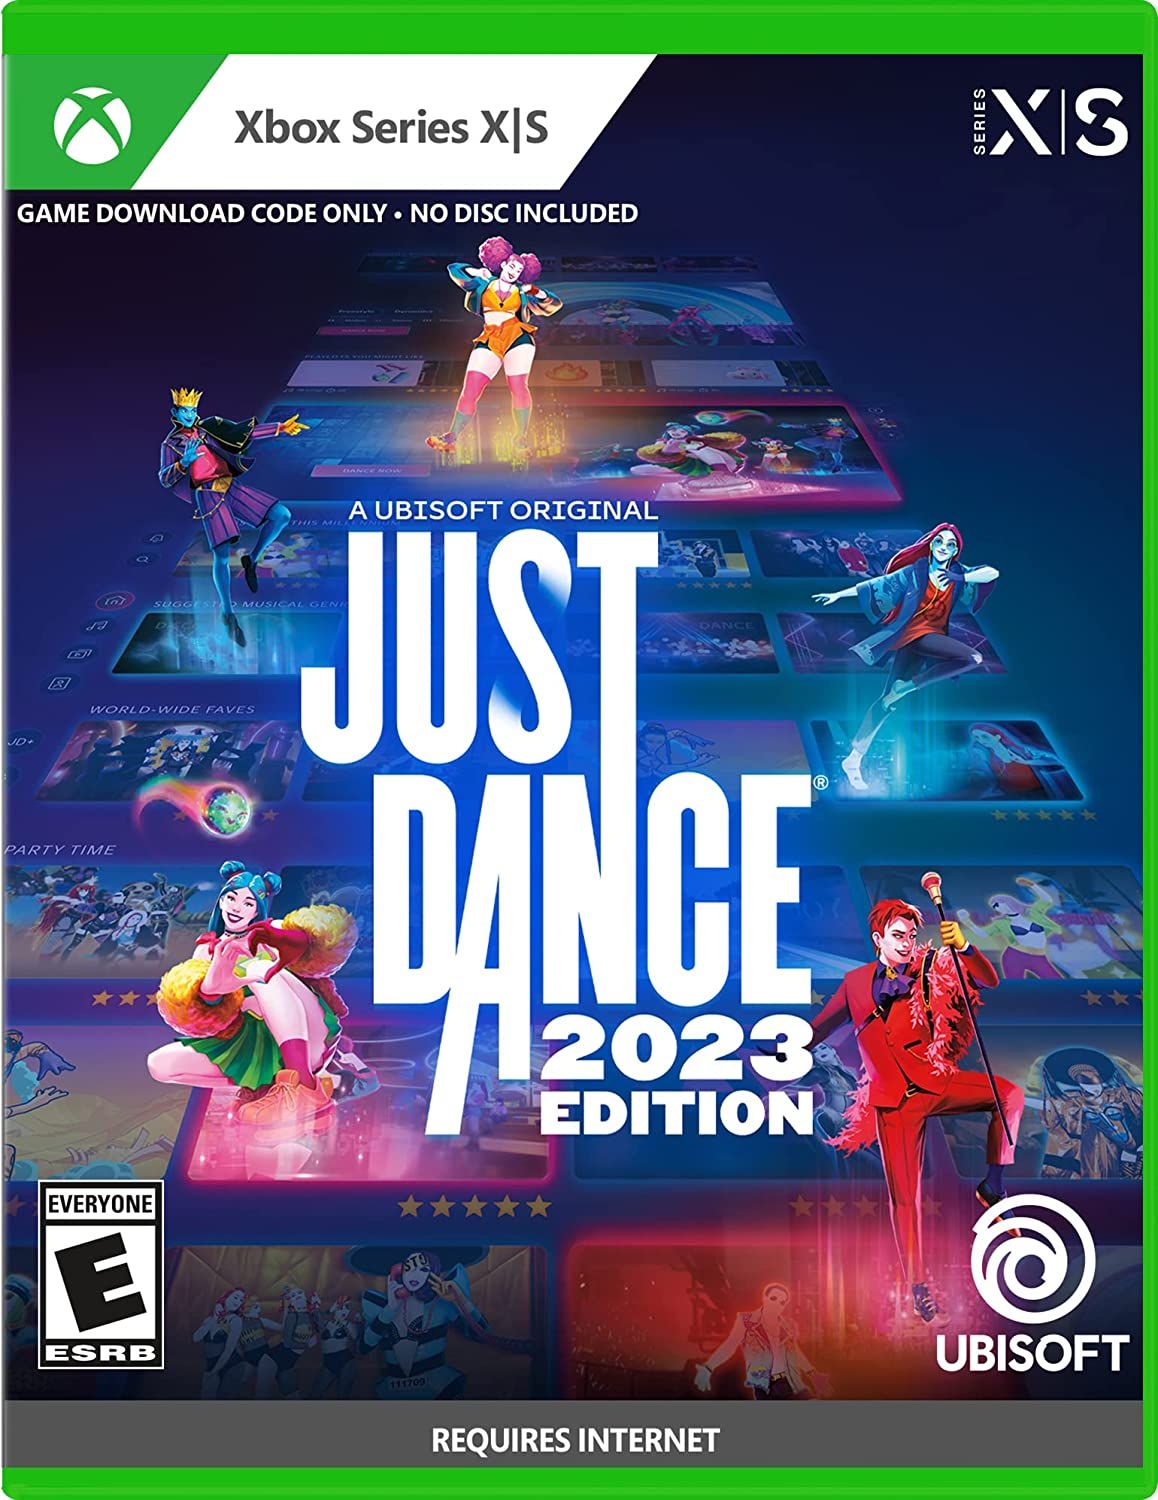 Just Dance 2023 Edition case for Xbox Series XS.